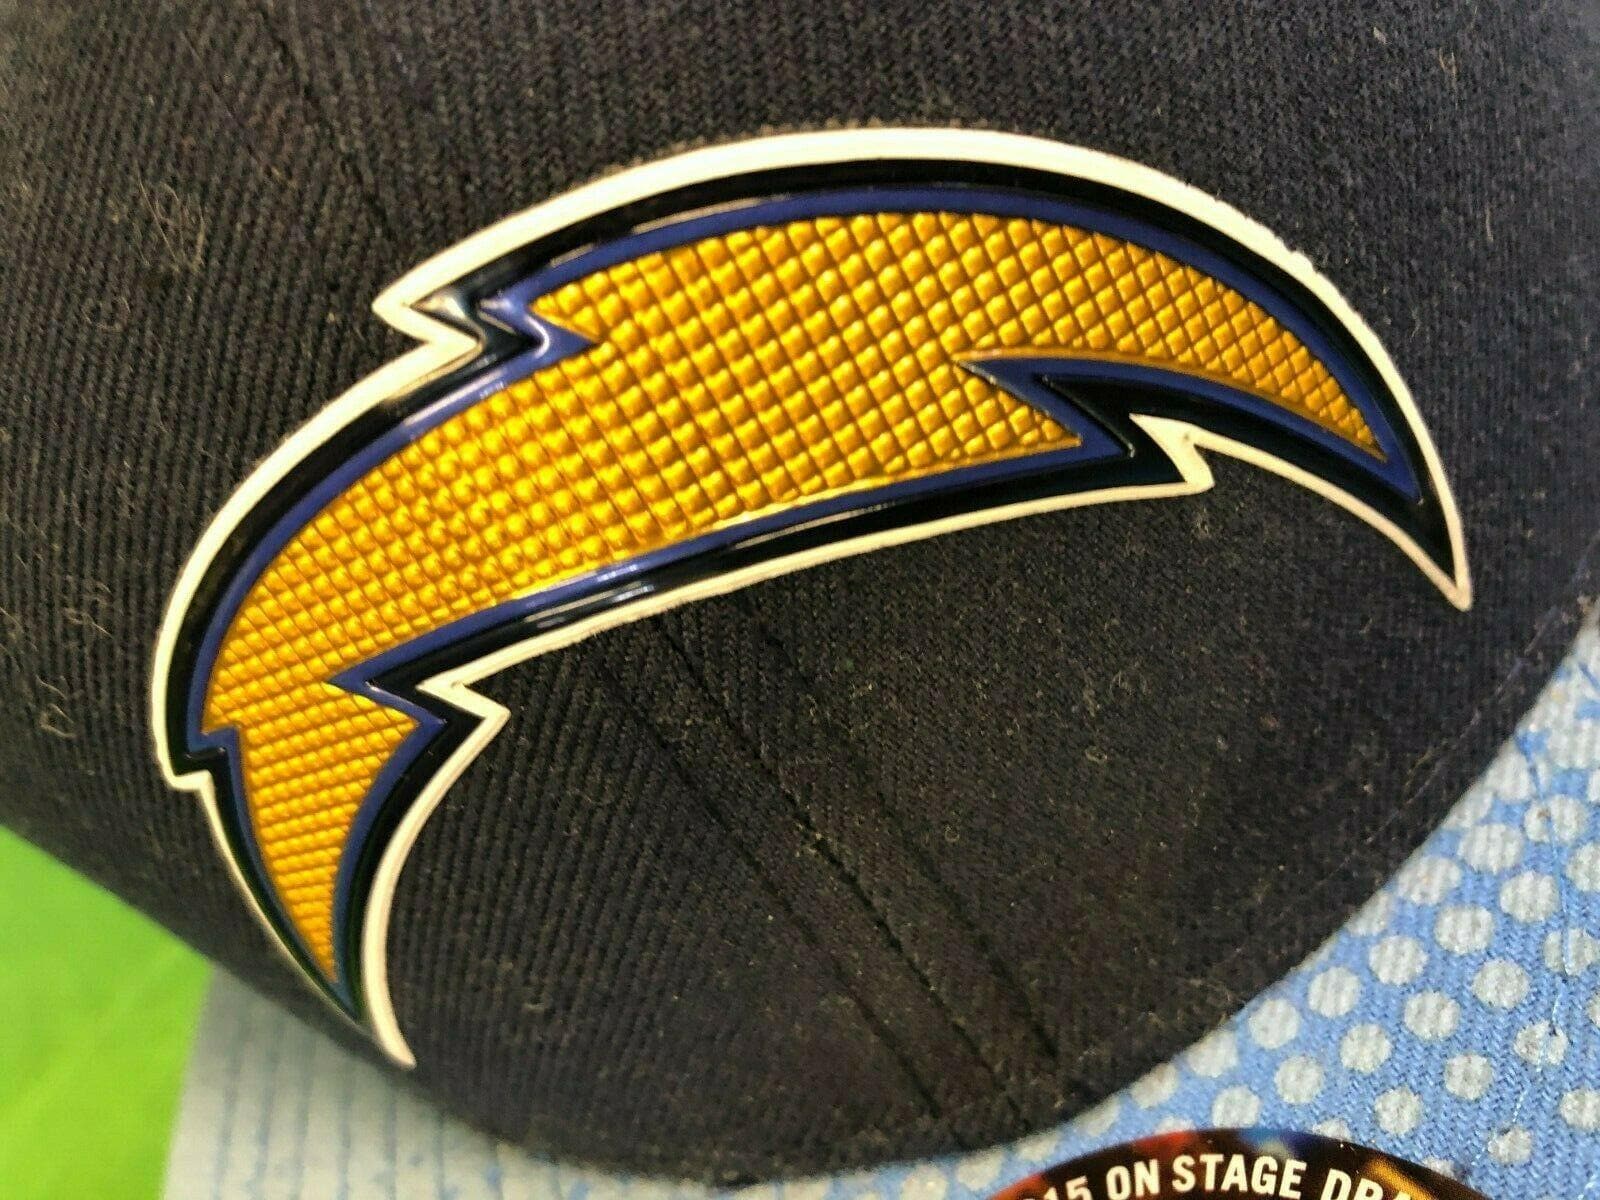 NFL Los Angeles Chargers New Era 59FIFTY 2015 Draft Hat/Cap NWT 7-3/8